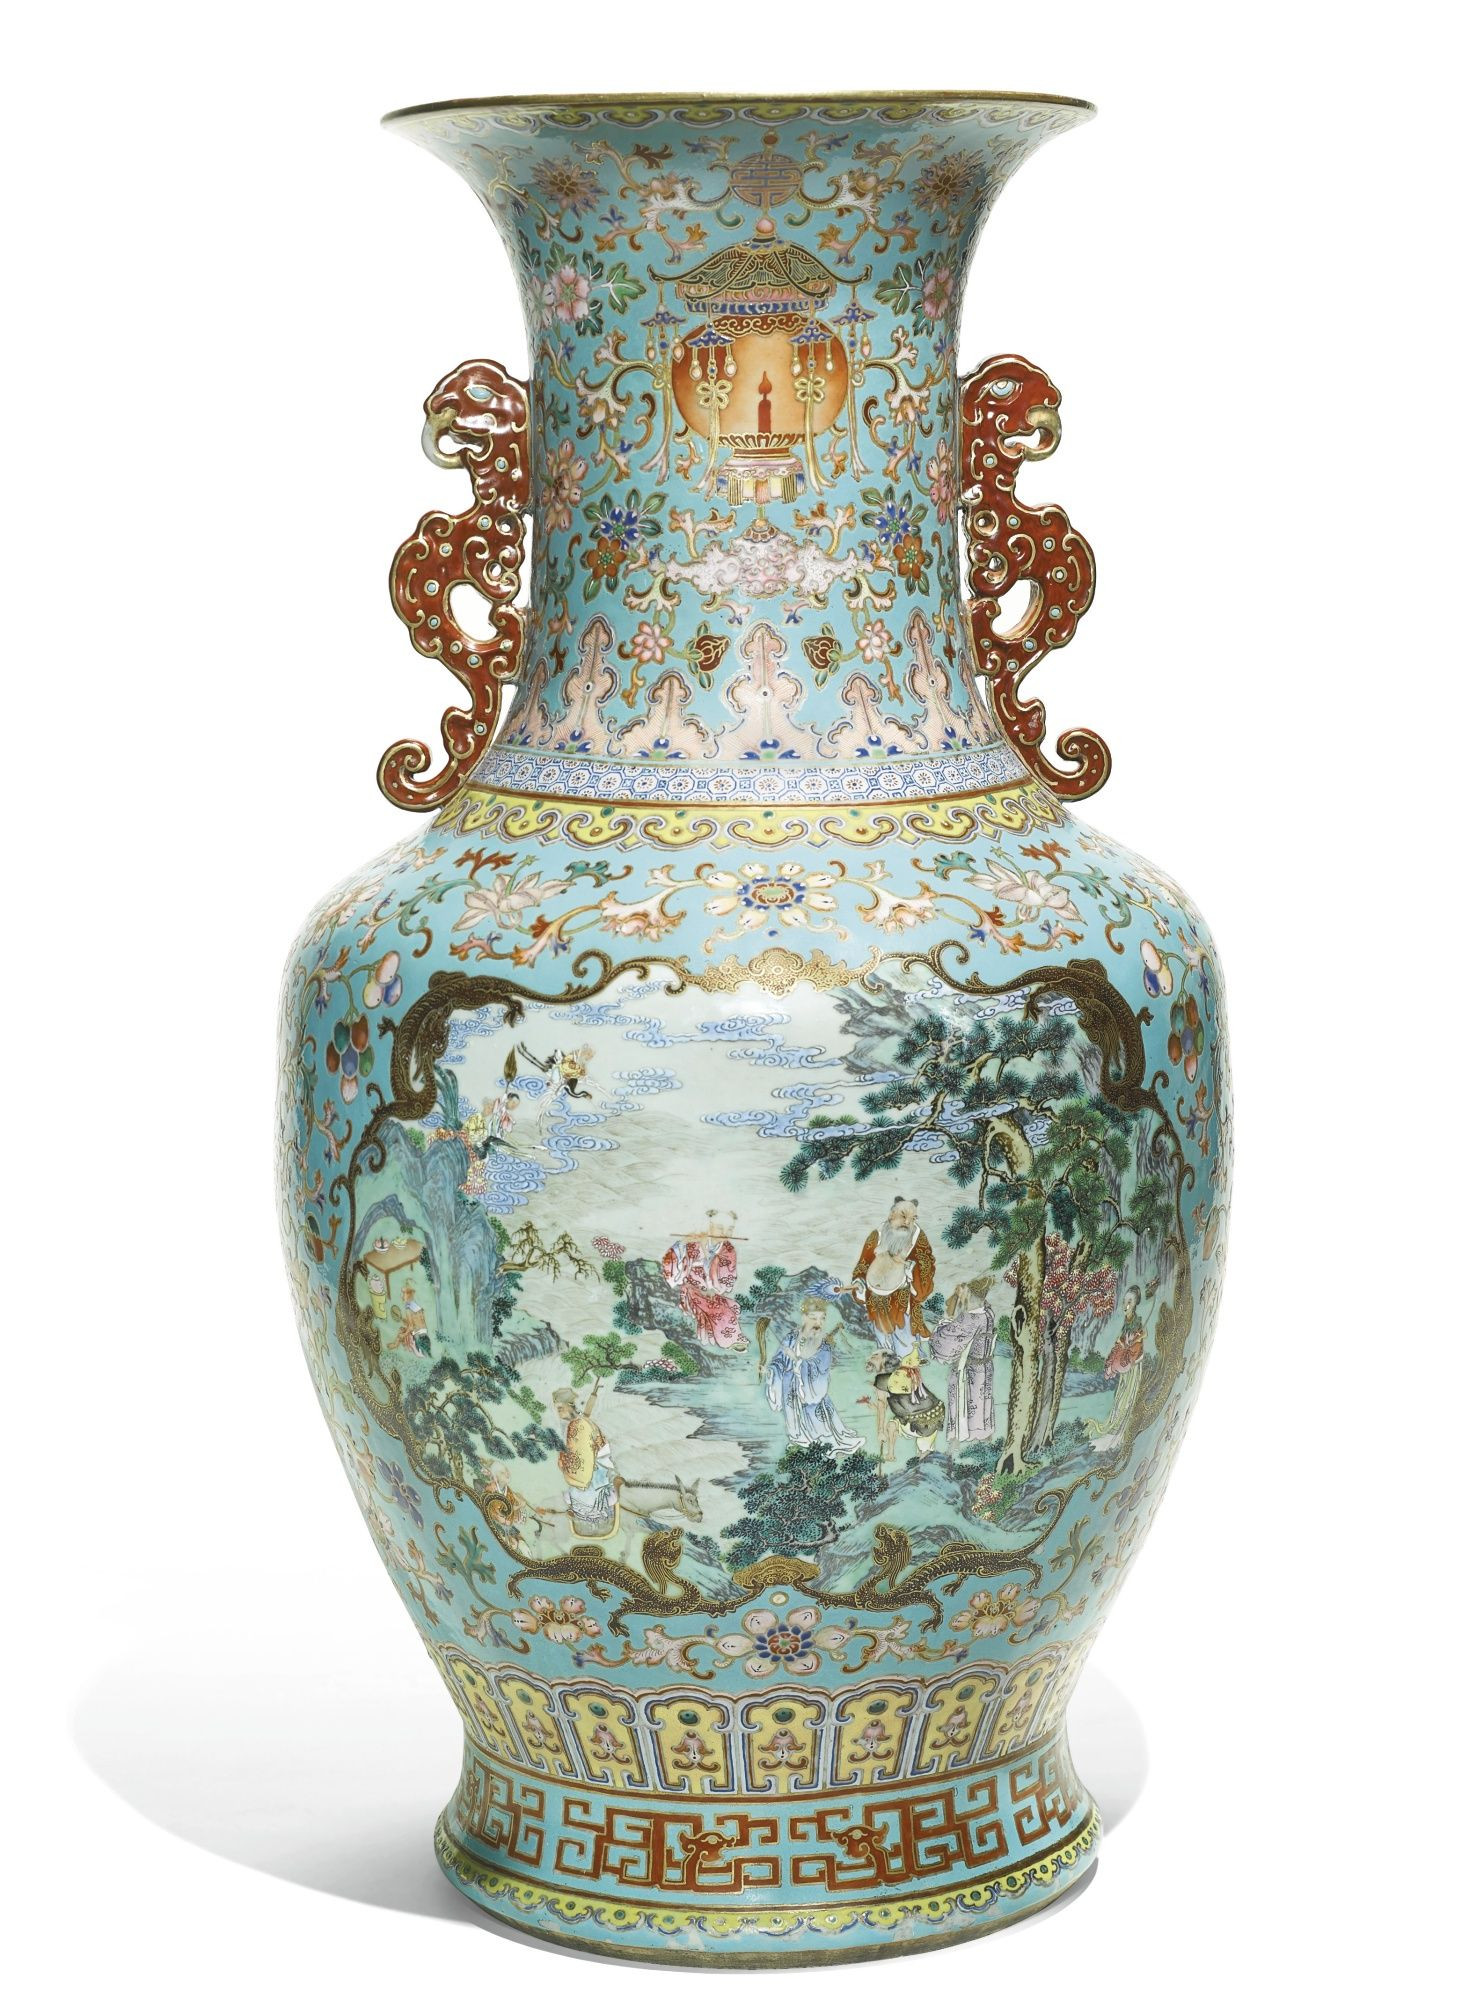 16 Perfect Antique Chinese Vases for Sale 2022 free download antique chinese vases for sale of a large and finely enamelled famille rose immortals vase qing within a large and finely enamelled famille rose immortals vase qing dynasty 18th century soth